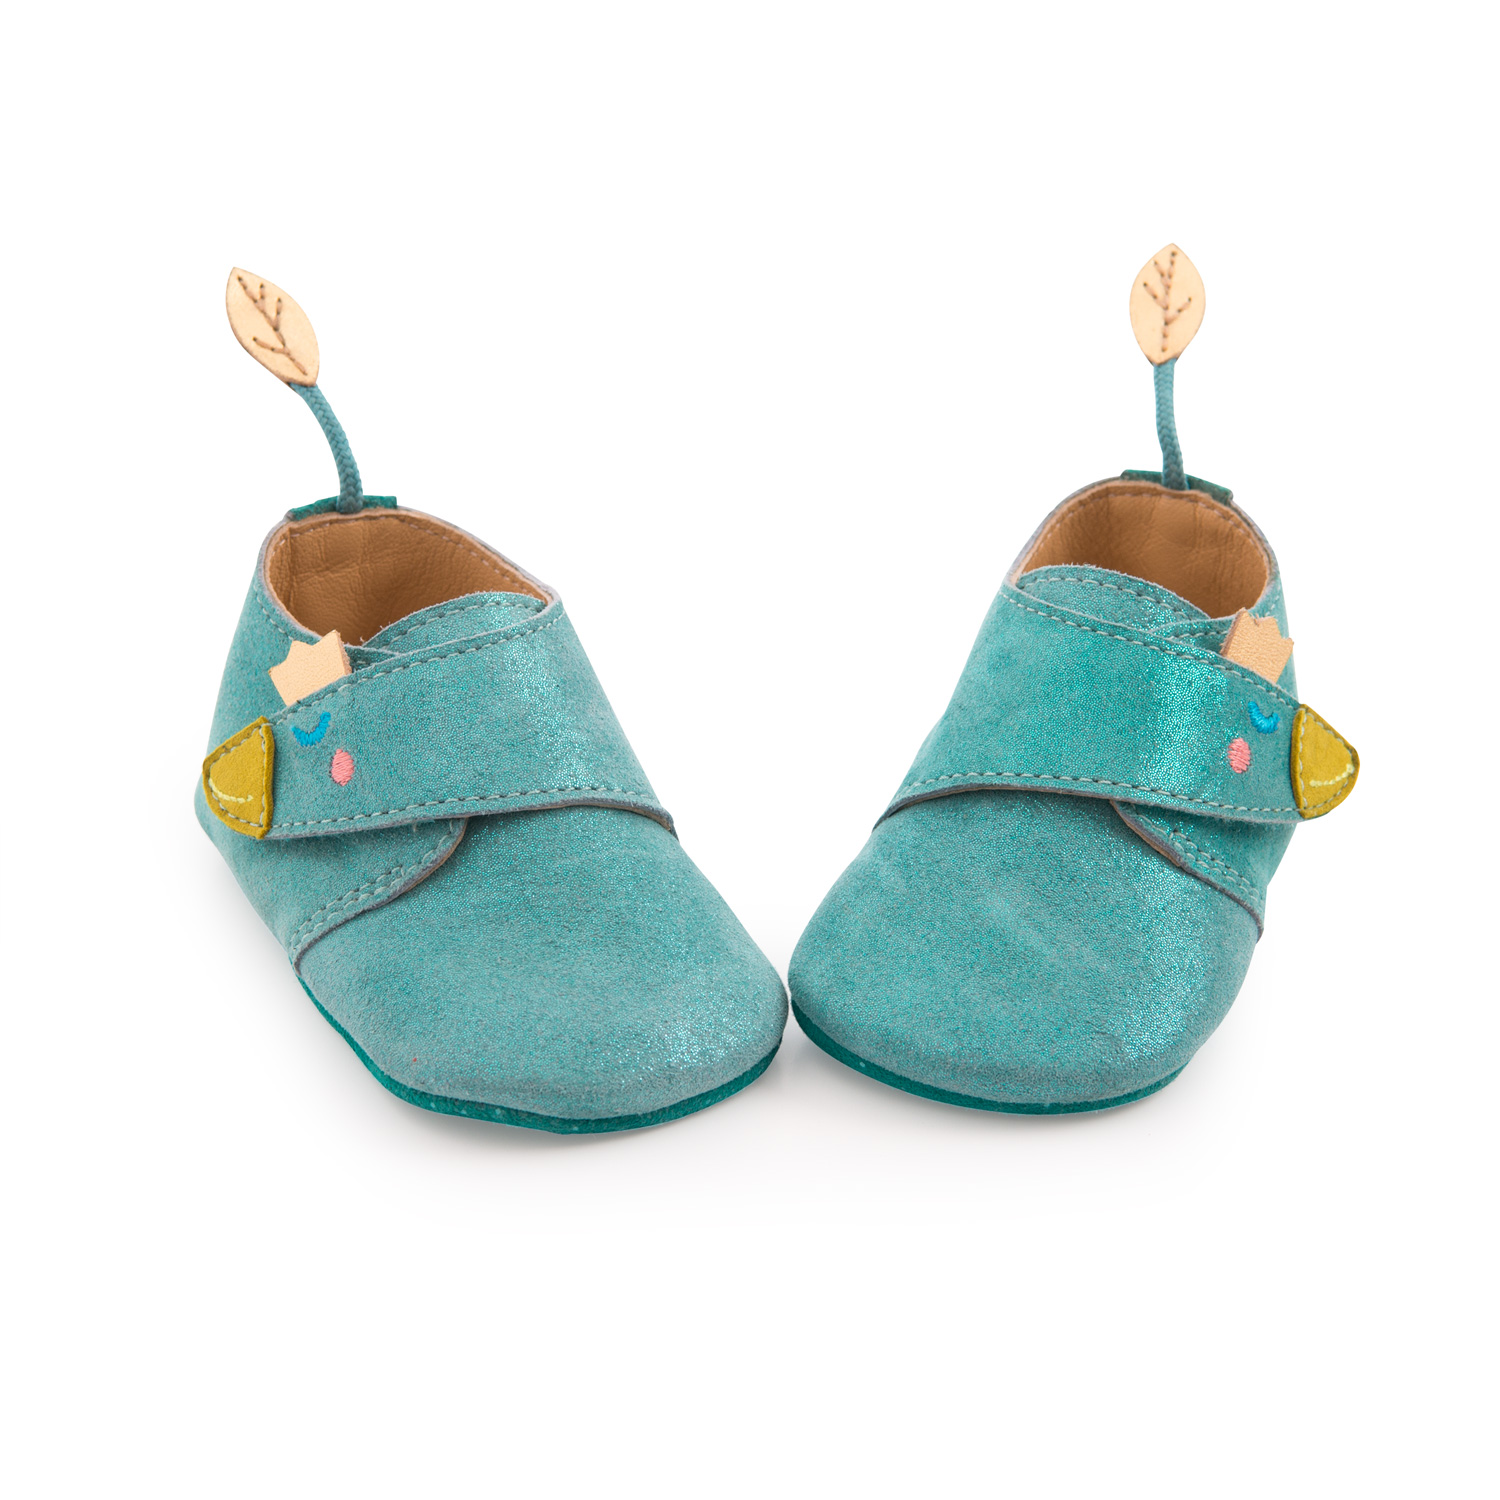 Chaussons cuir oie bleu le voyage d'Olga 12/18 mois Moulin Roty